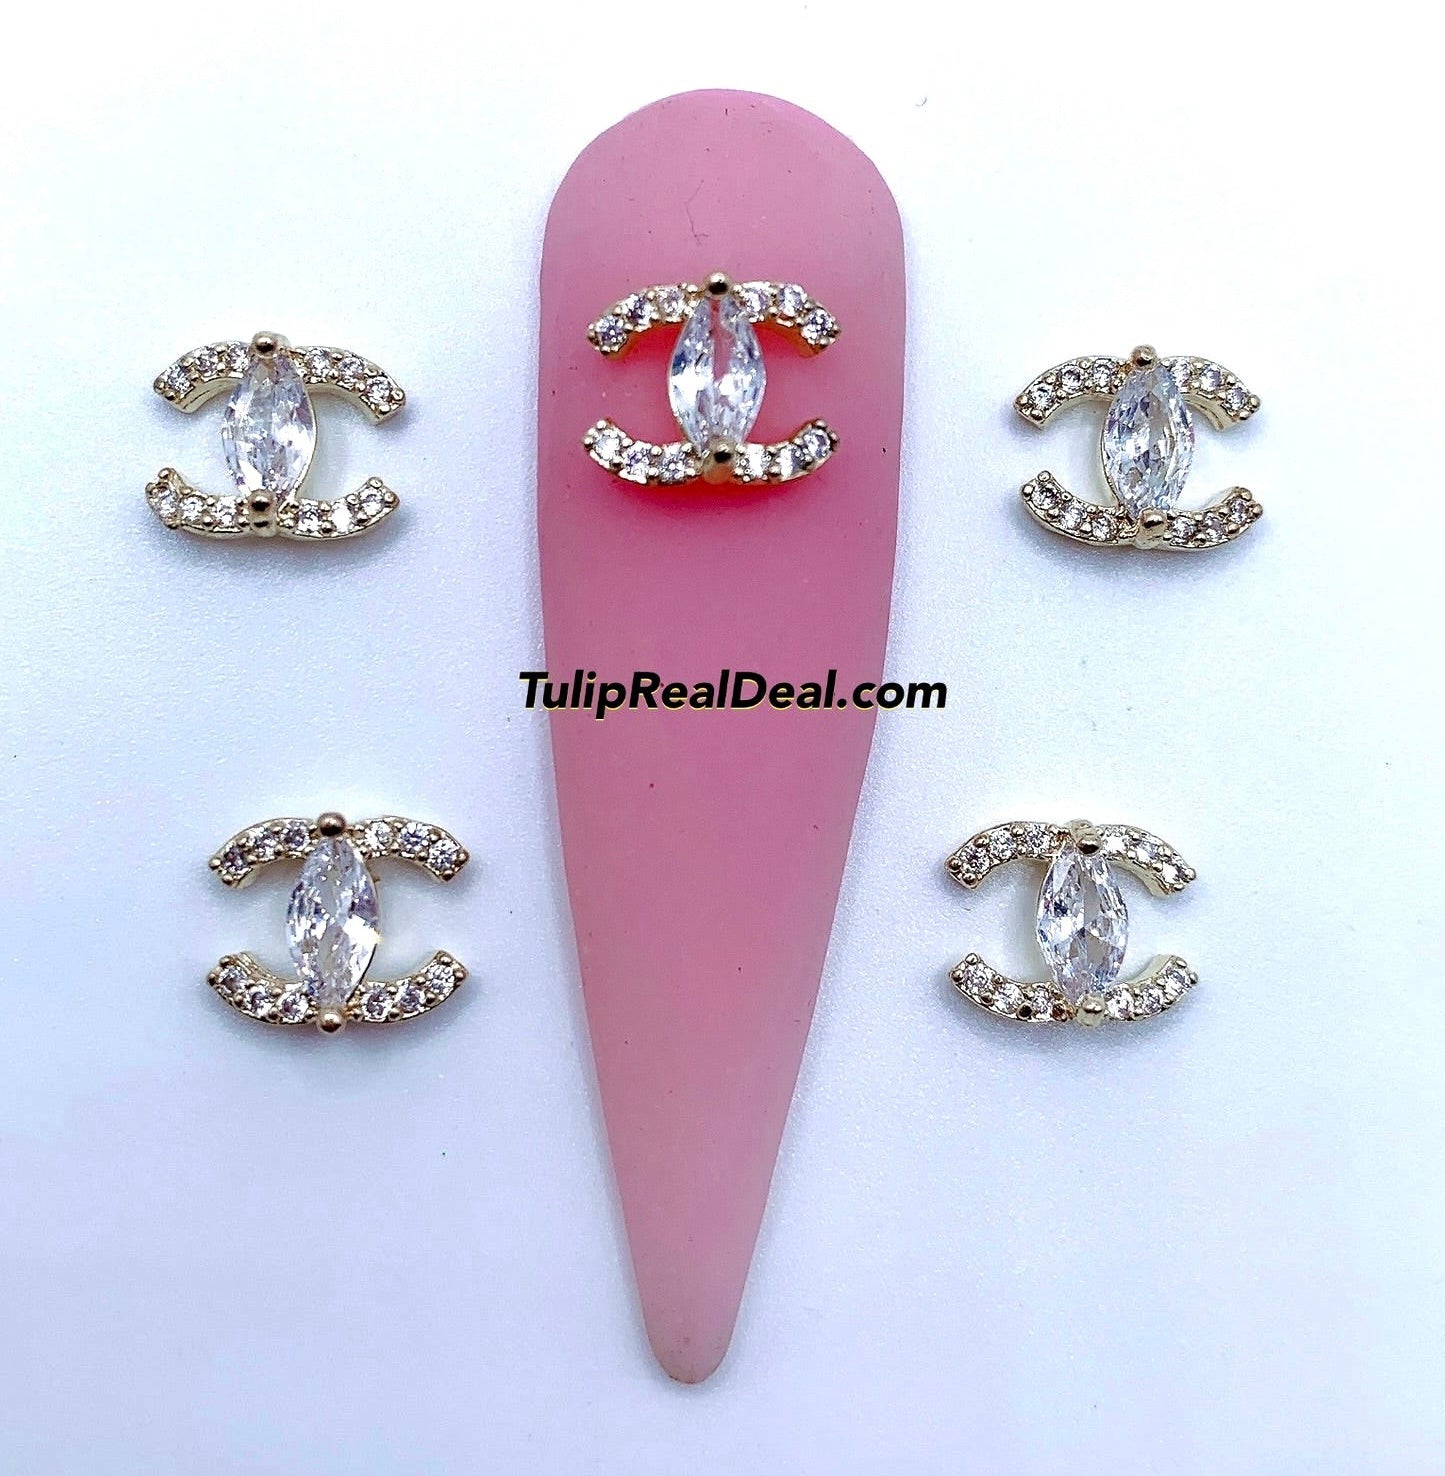 Zircon Vintage C Bling Nail Charms 5pcs – Tulip Real Deal